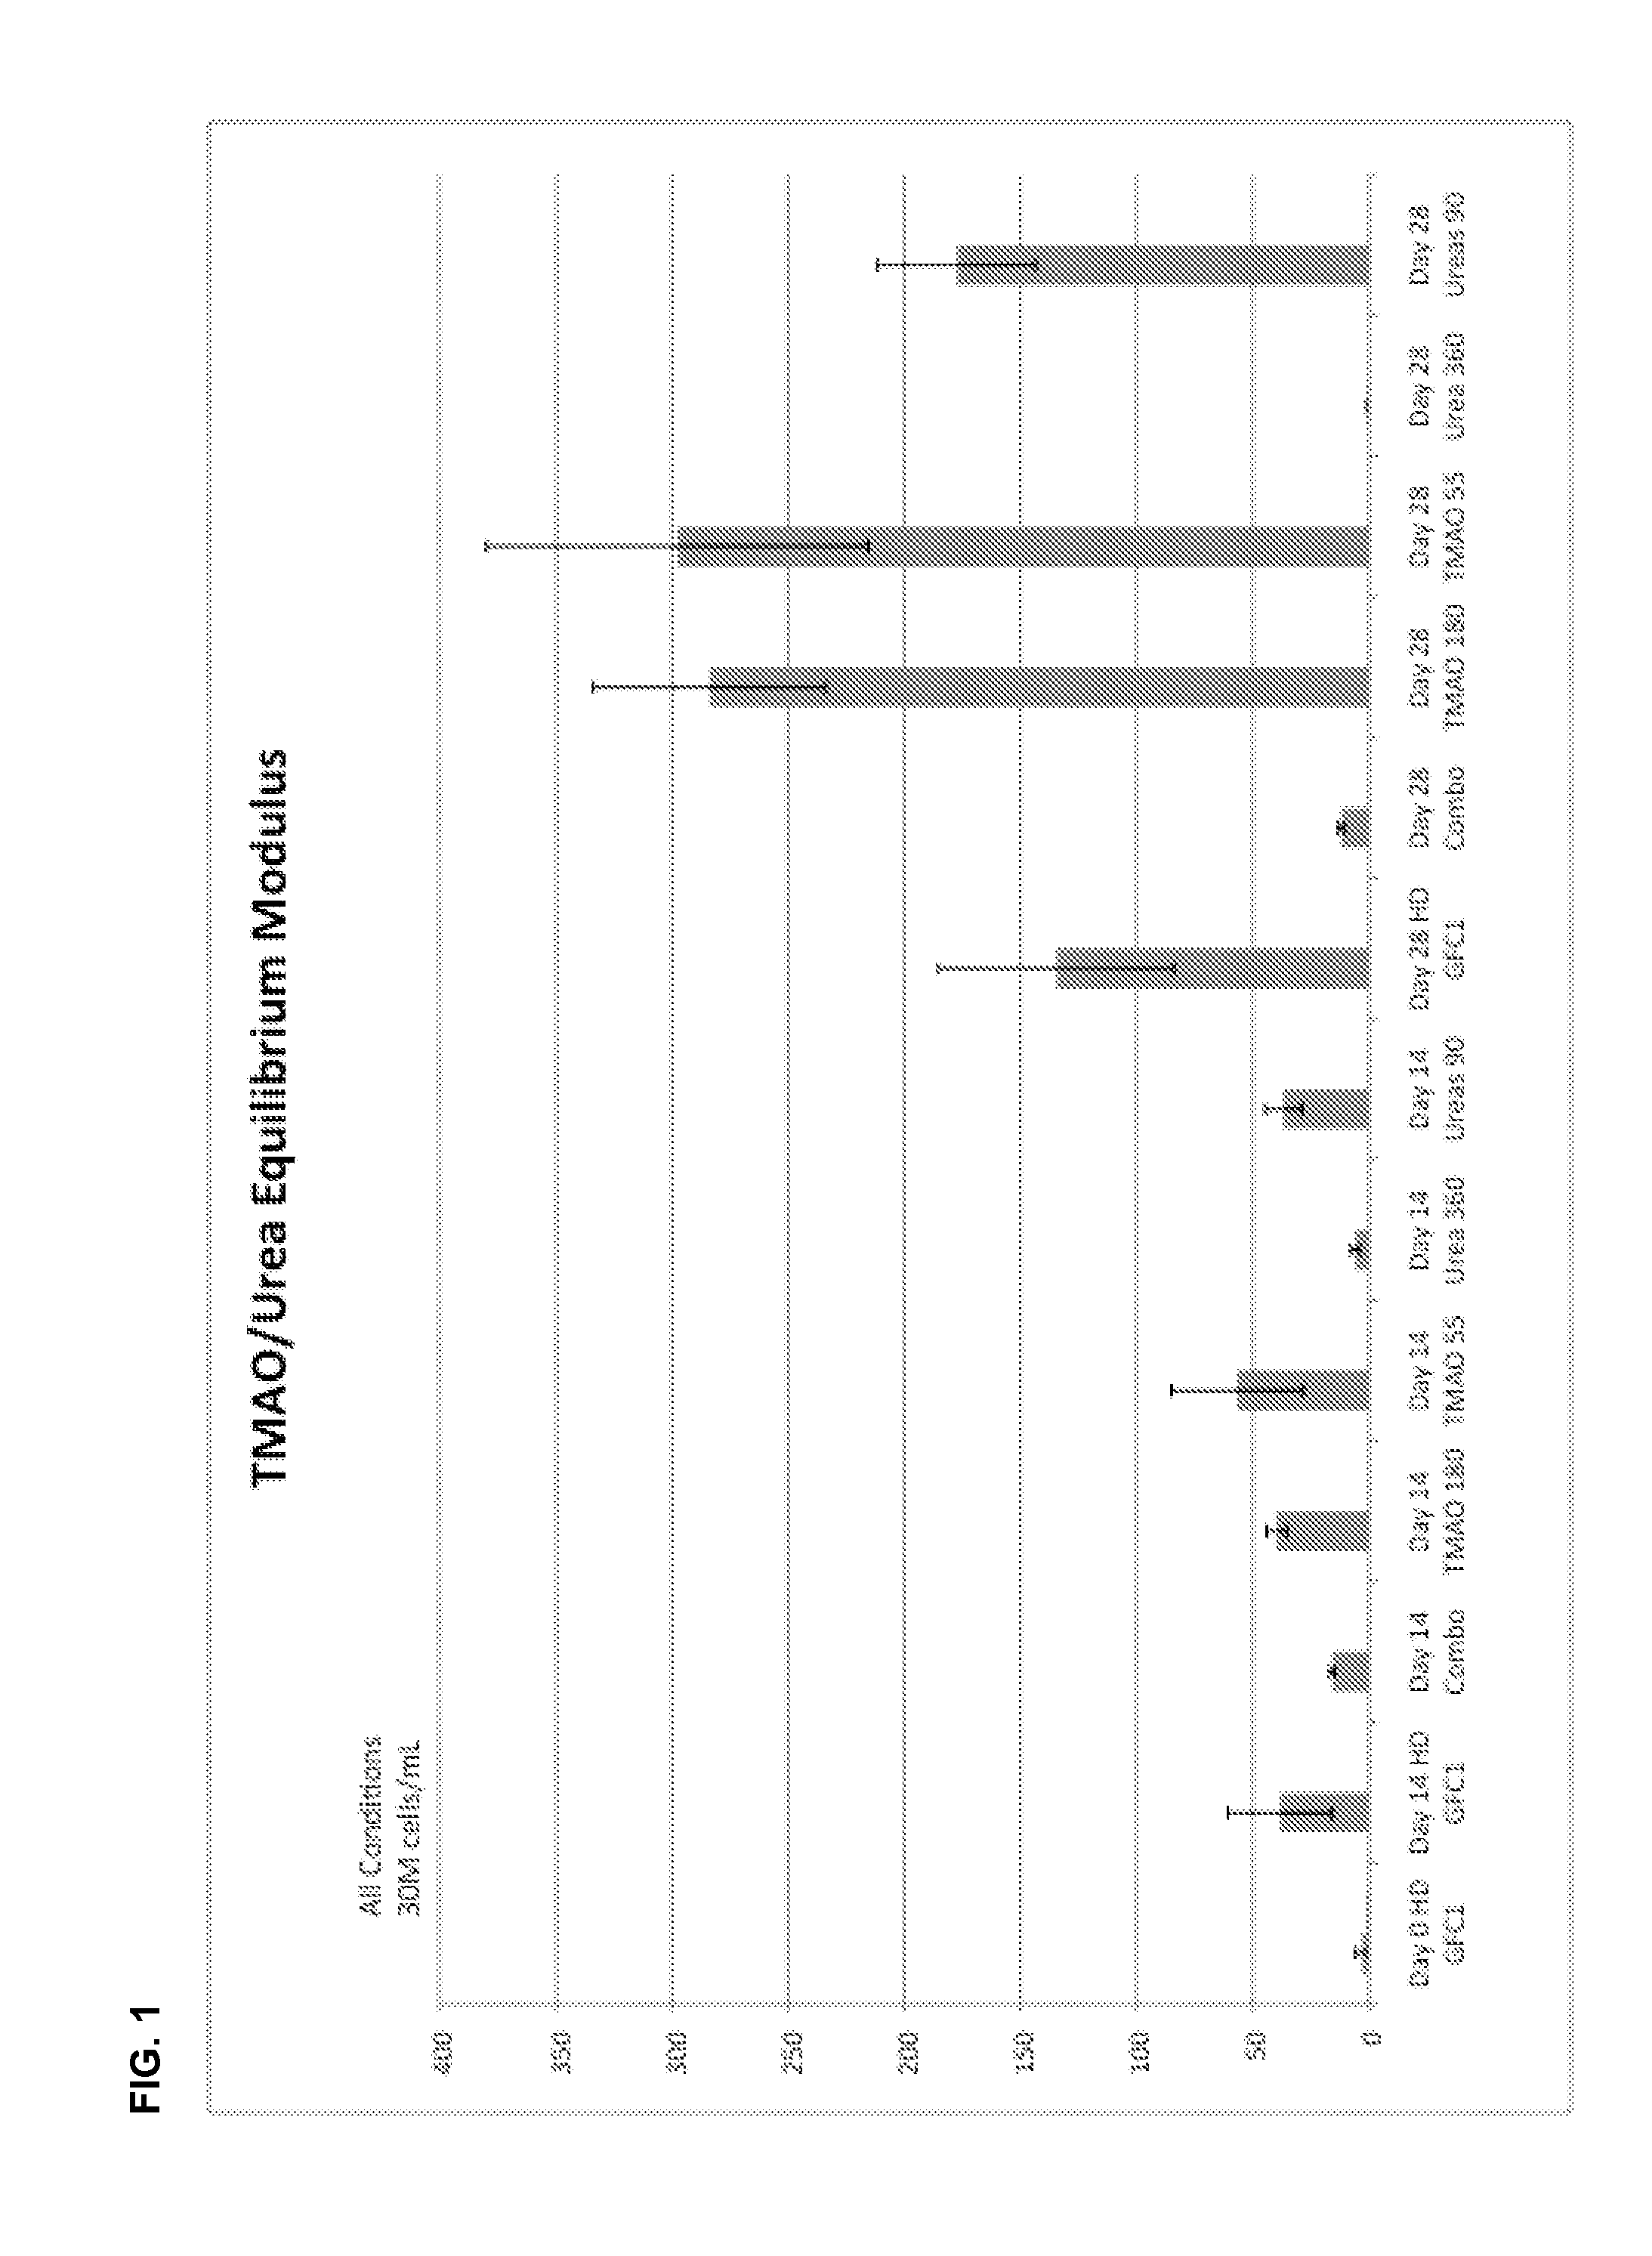 Tissue culture method for producing cartilage using trimethylamine N-oxide and chondroitinase